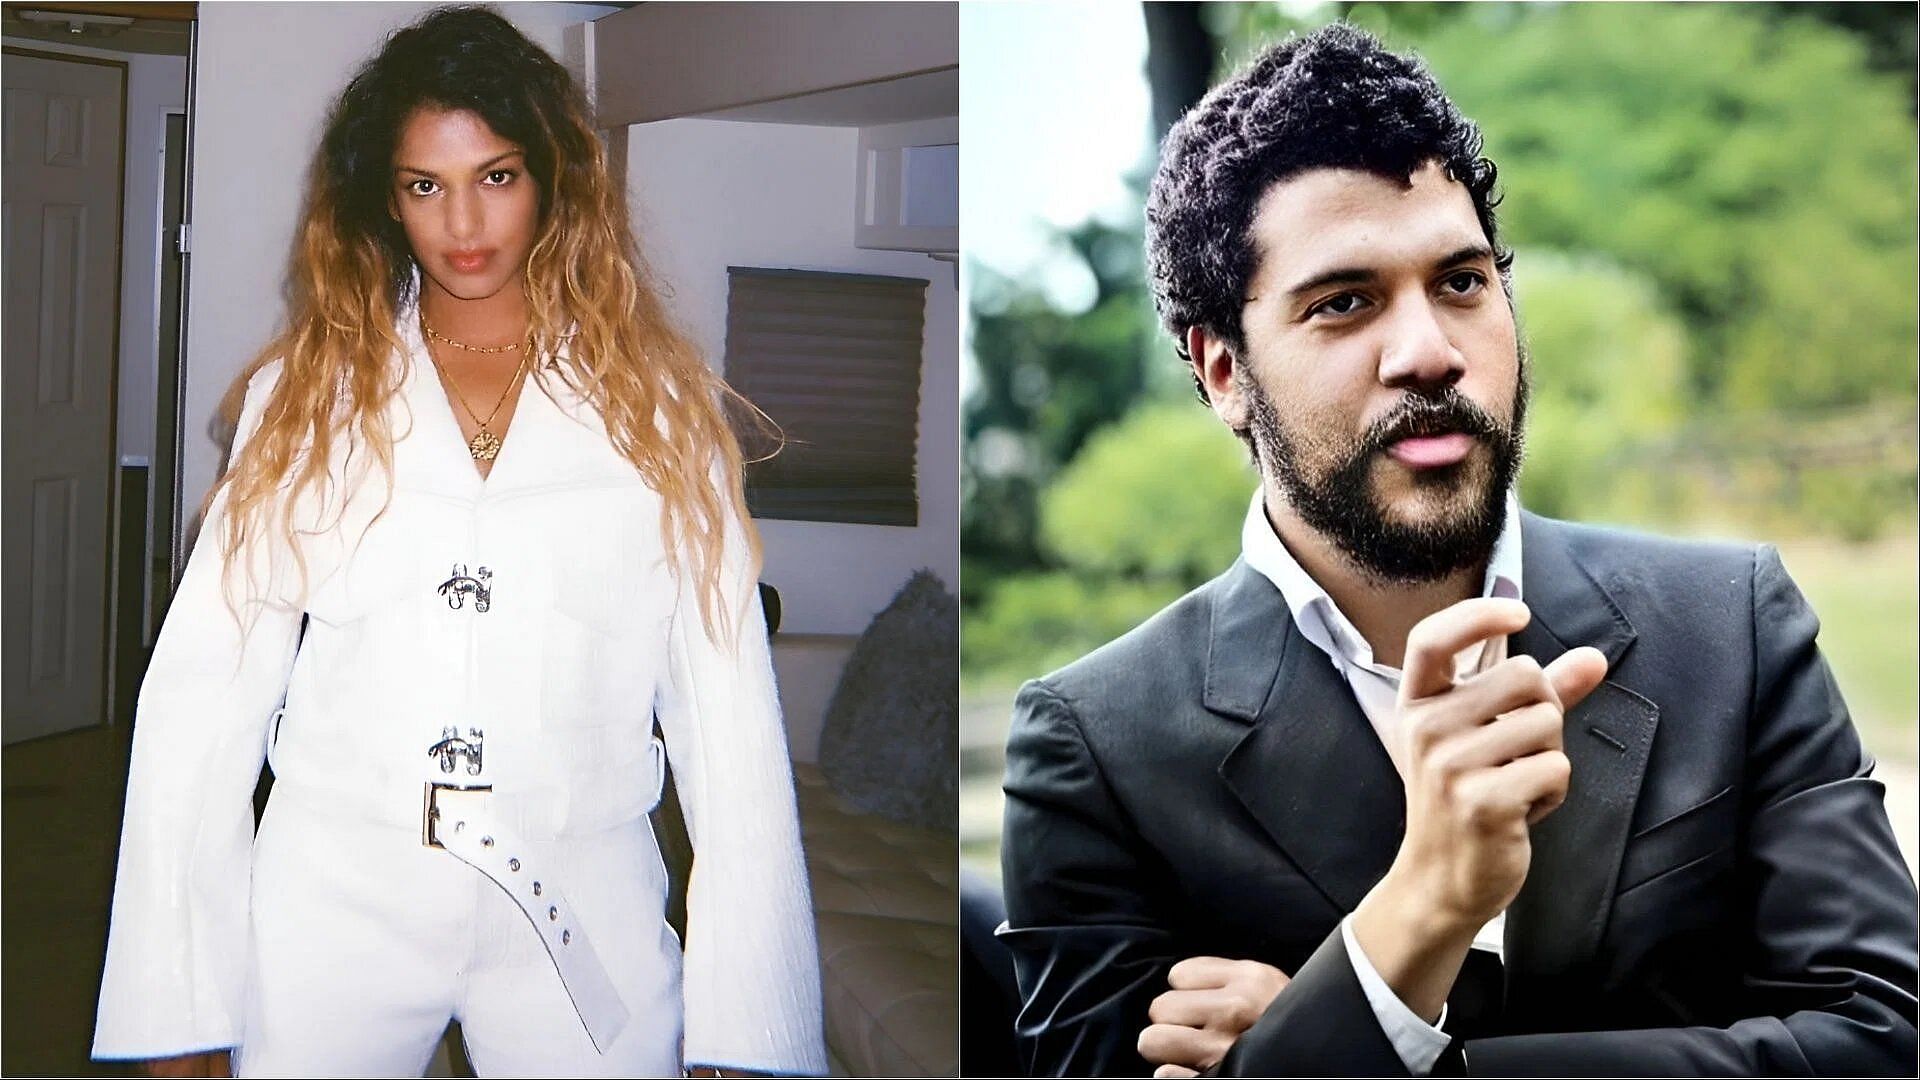 M.I.A.(Left) and Benjamin Bronfman (Right) (Image via Instagram @miamatangi and Geo Thermostat)